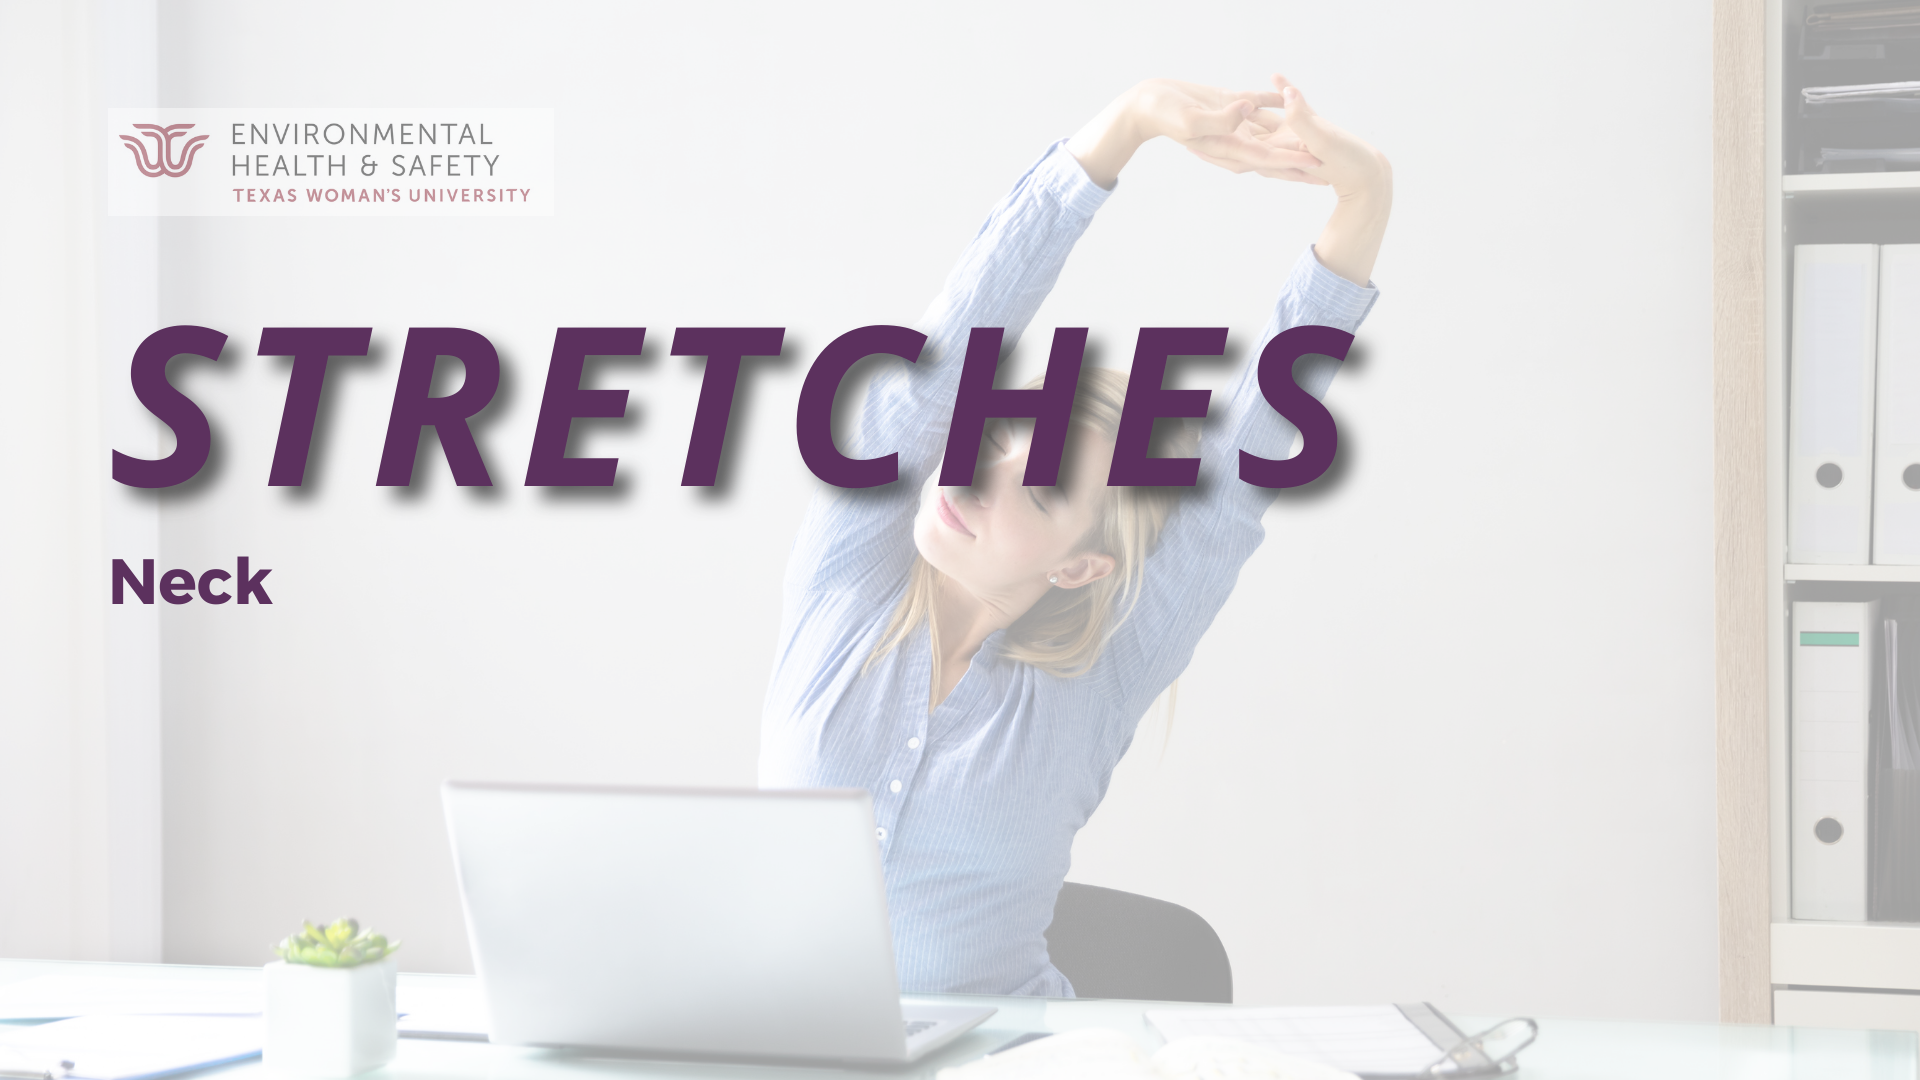 Background is a photo of a woman in a blue shirt sitting at a desk with a laptop and stretching with her arms overhead. In the foreground is text that says "Stretches: Neck" and has the TWU Environmental Health and Safety logo